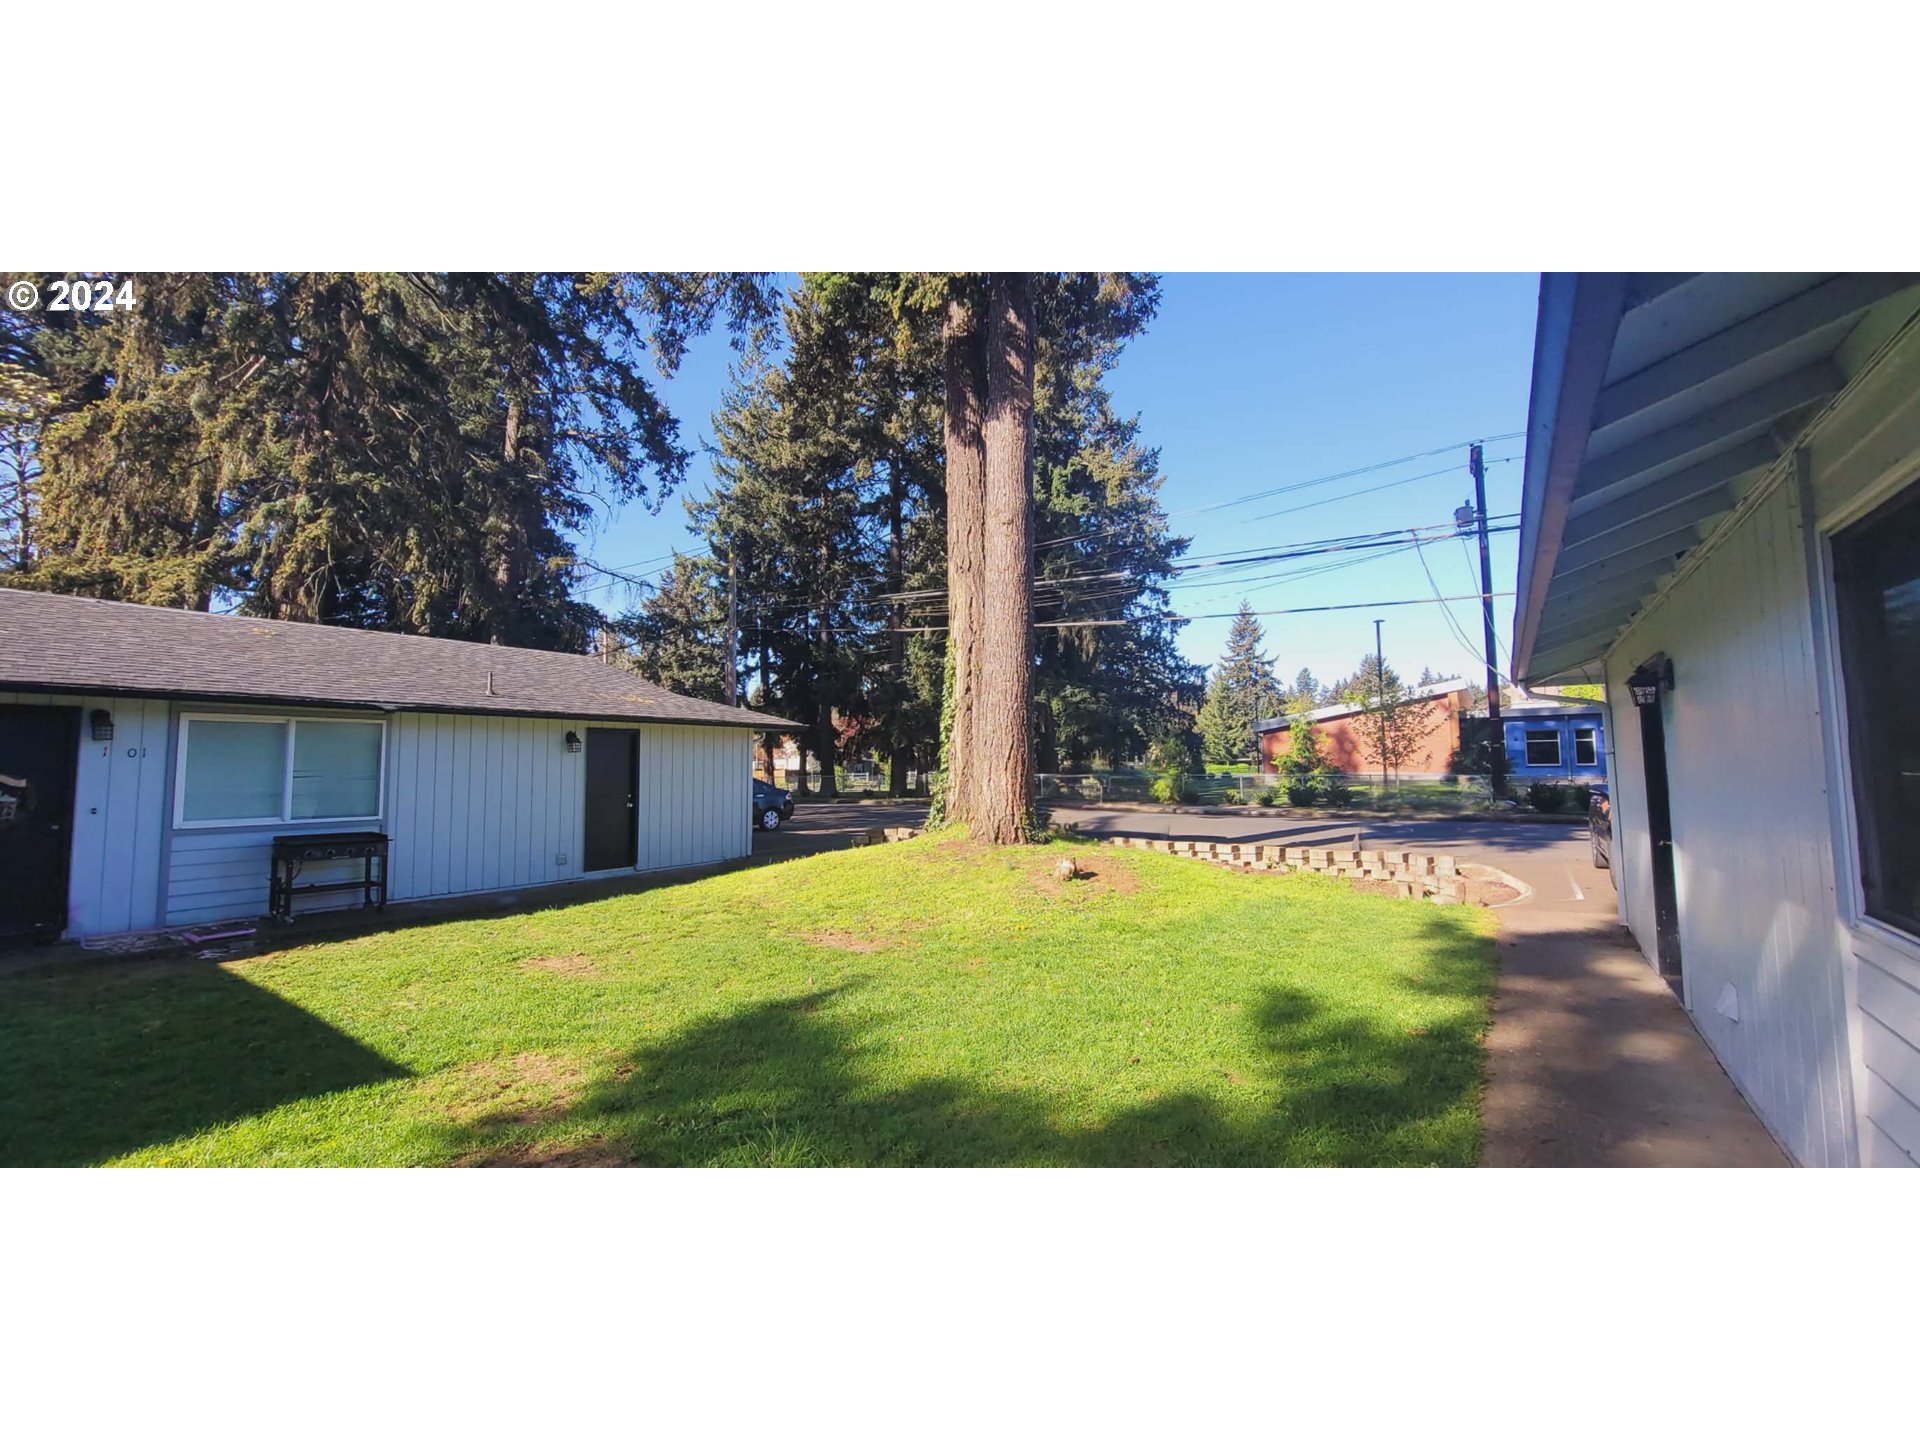 1905 Norris Rd, Vancouver, Washington, 98661, United States, ,Residential,For Sale,1905 Norris Rd,1506540